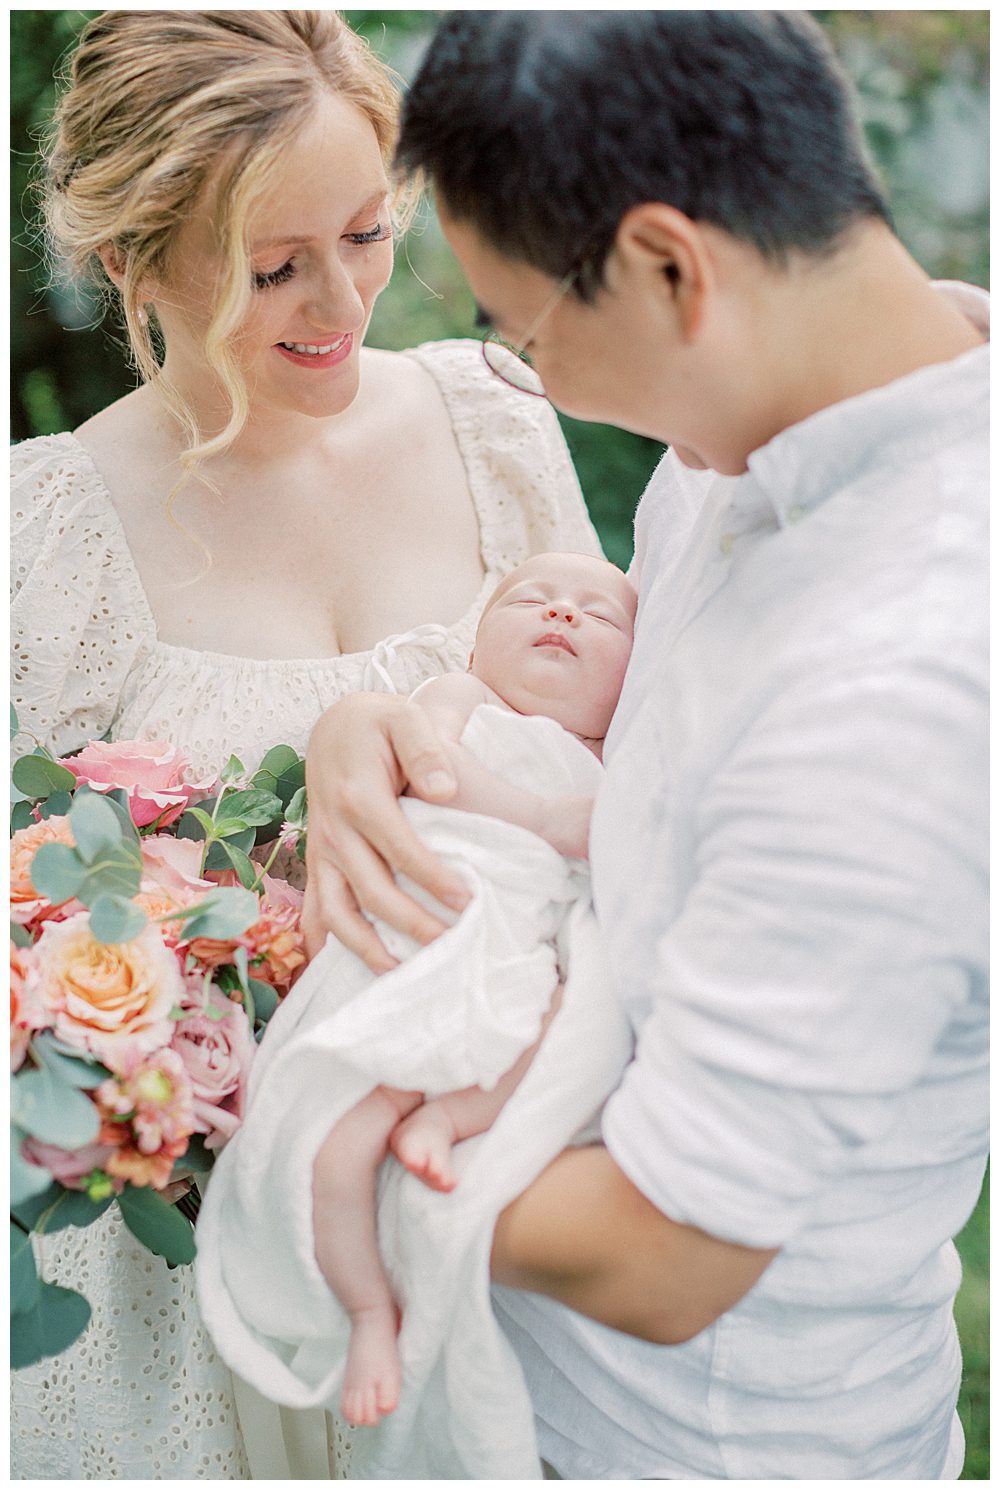 Parents hold their newborn daughter and roses during outdoor Alexandria VA newborn session.